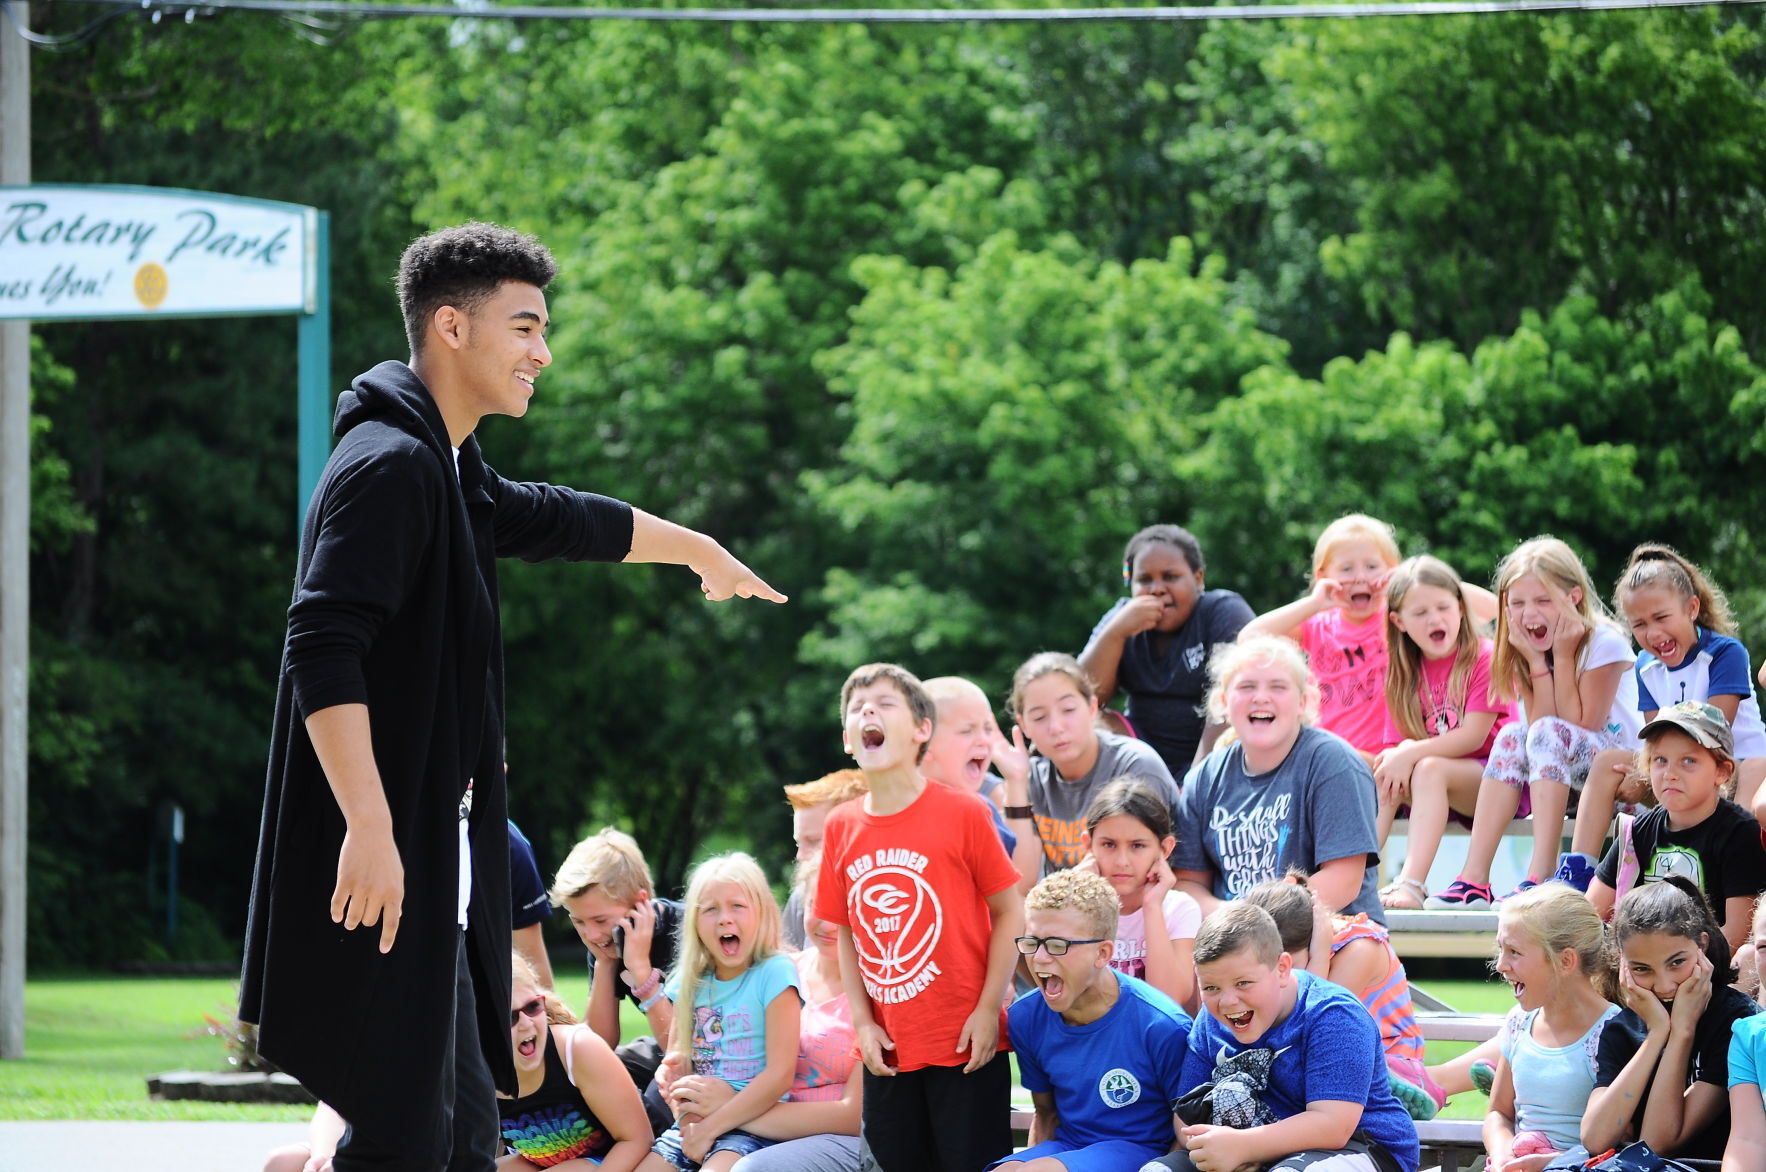 Summers heating up with local day camps Local News manchestertimes pic